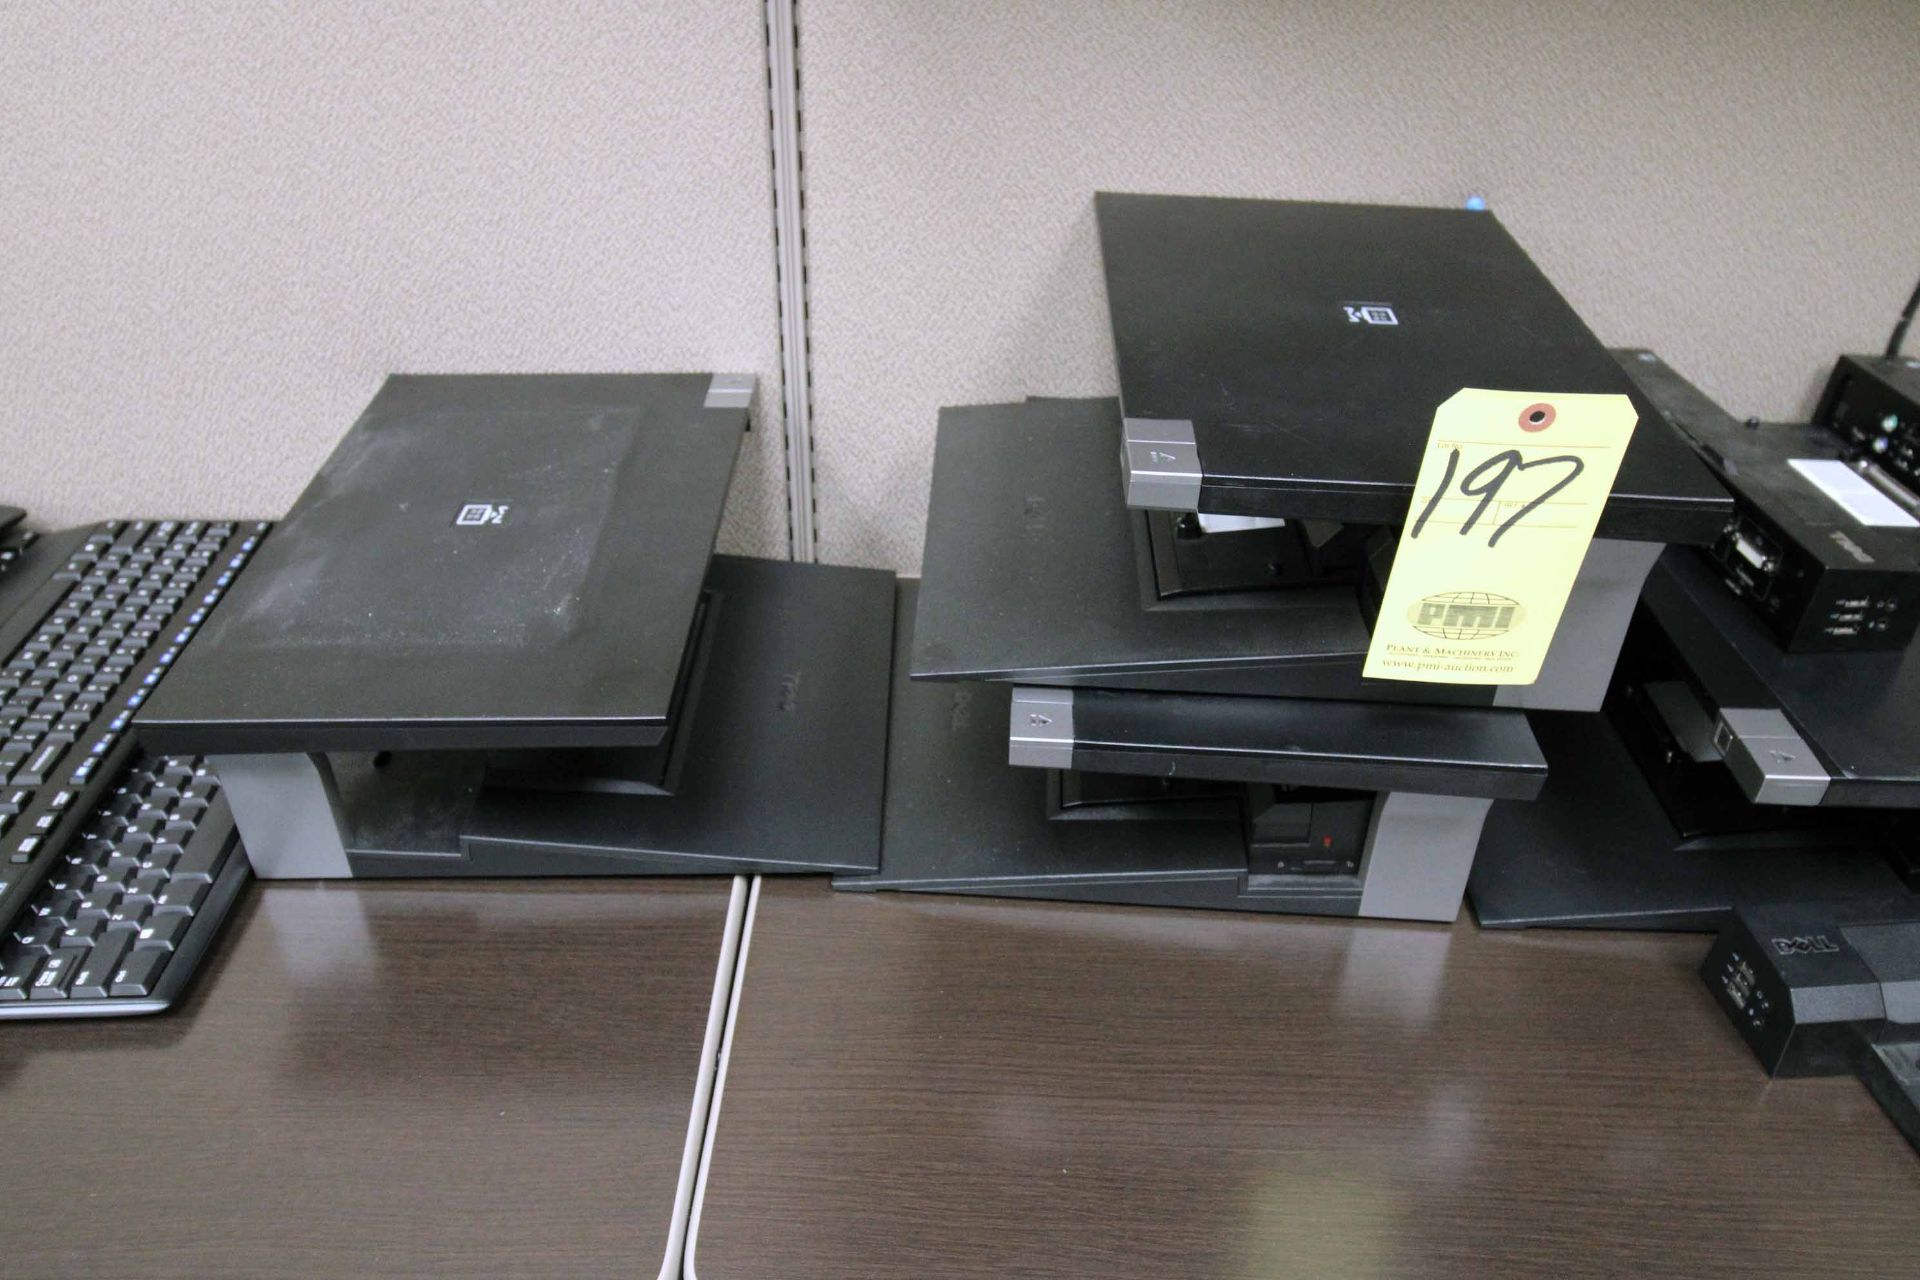 LOT CONSISTING OF: Dell docking stations, Cisco & Netgear switches & keyboards (Located at: Emco - Image 4 of 5